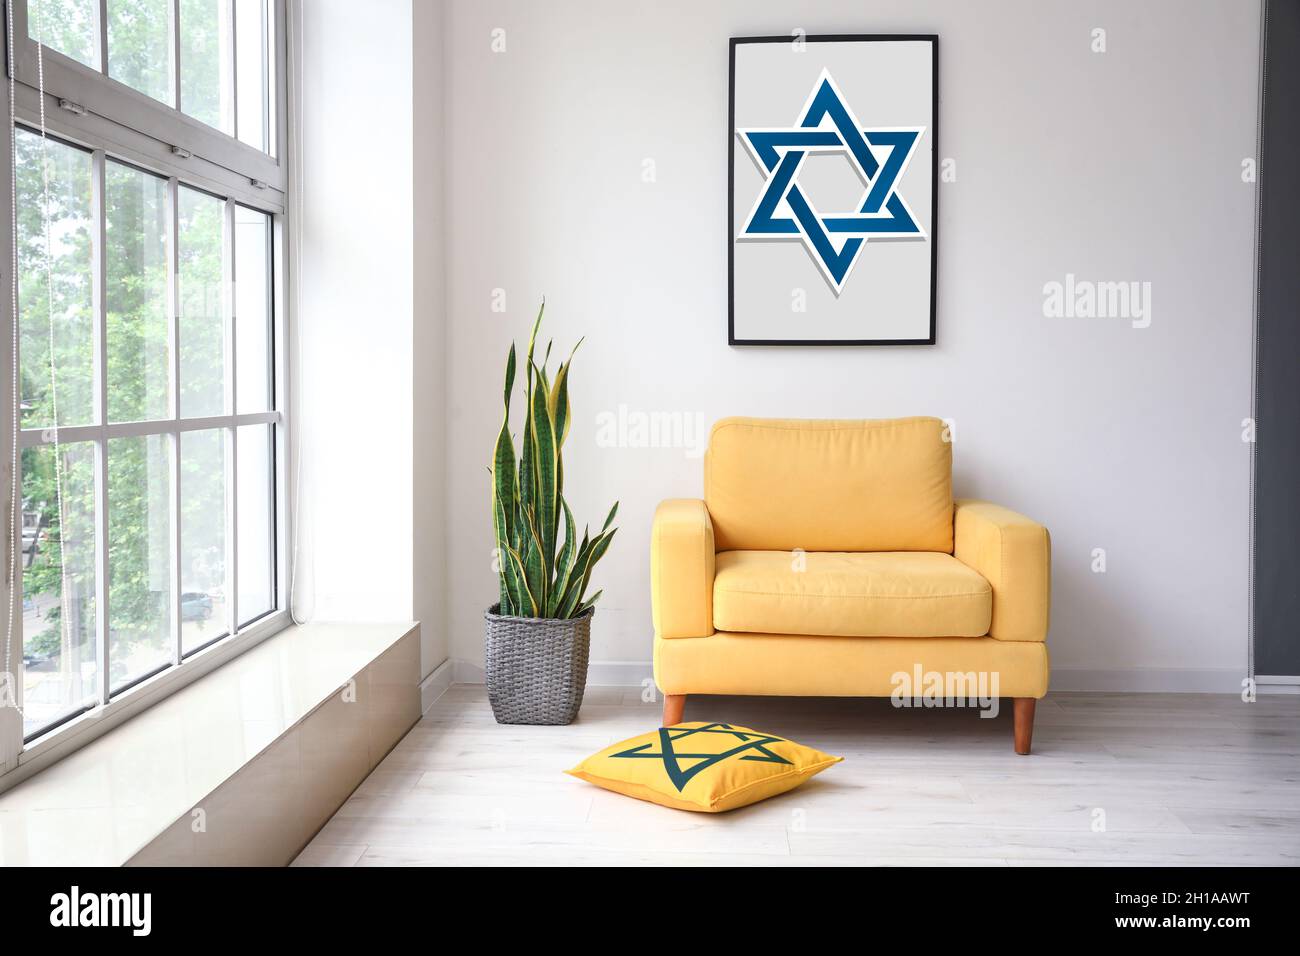 Painting of David Star hanging on light wall in interior of room Stock Photo